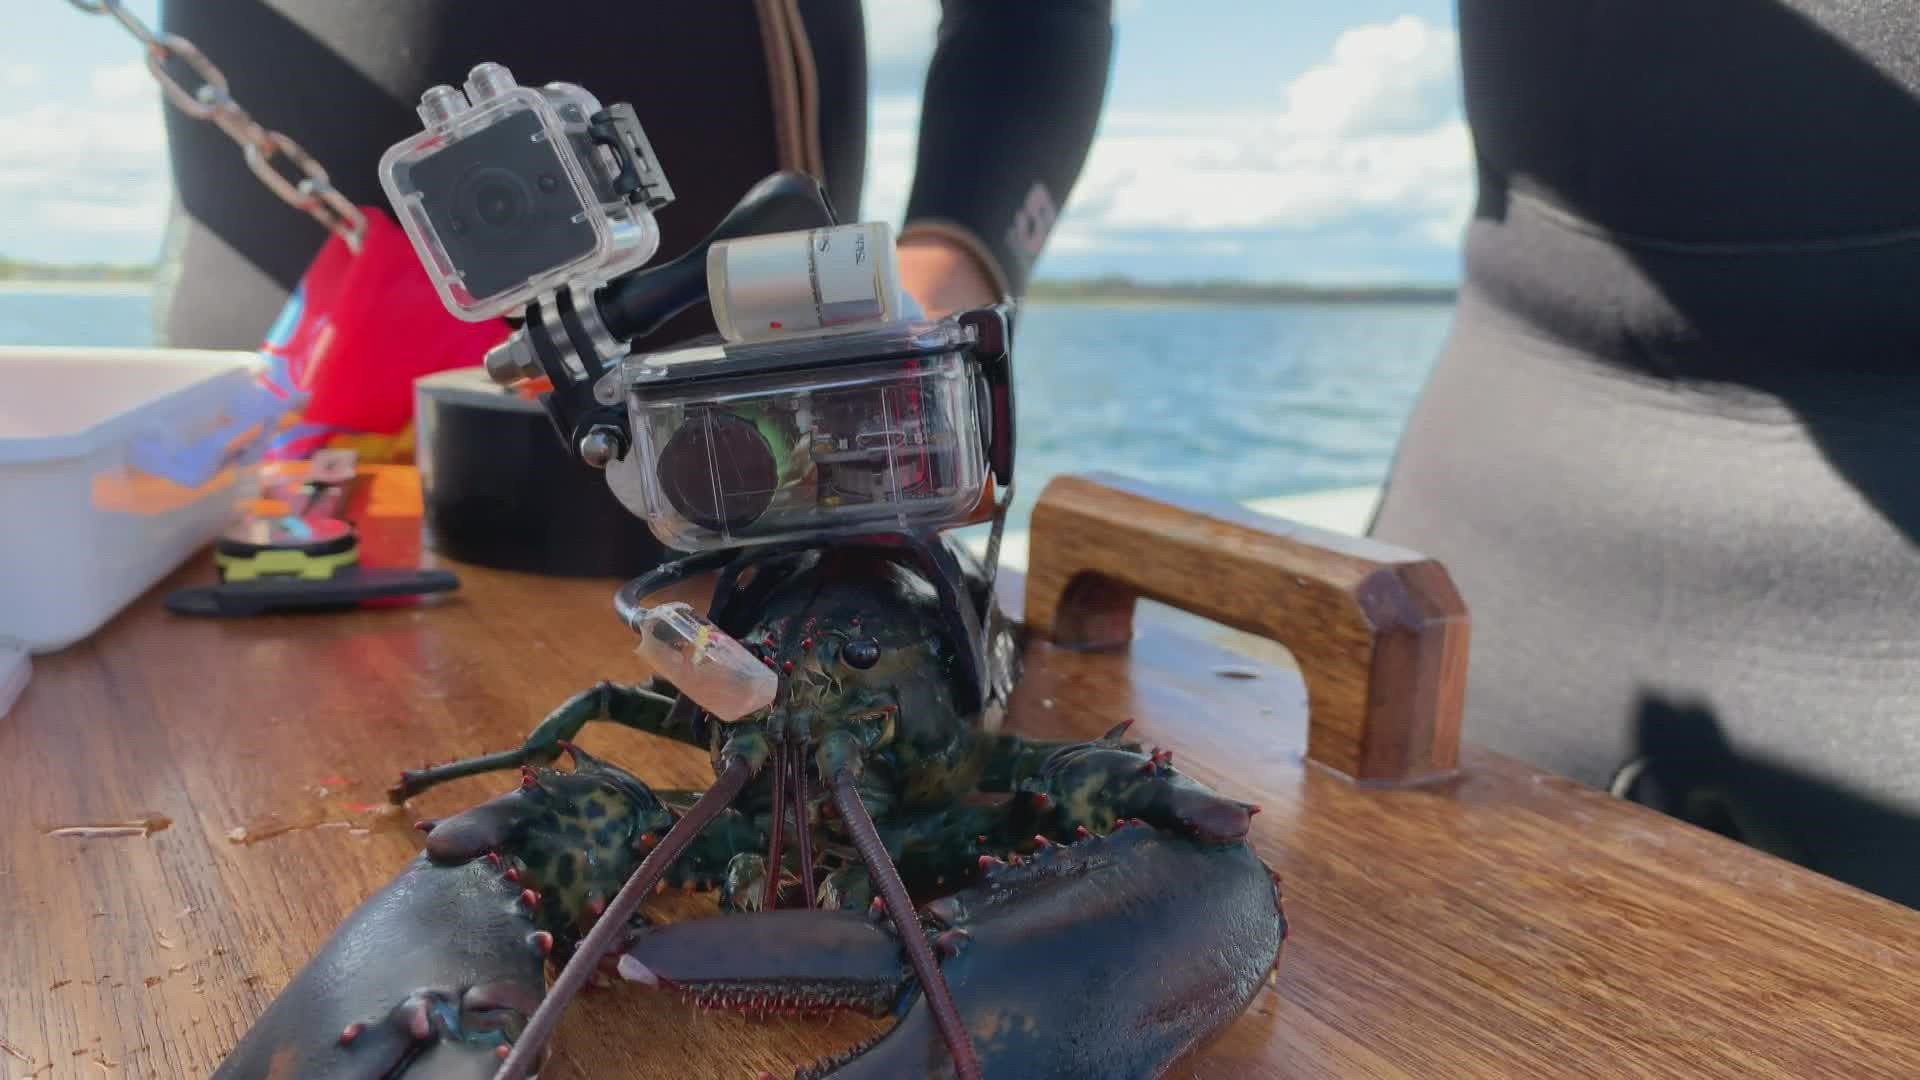 Scientists at Wells Reserve are learning more about lobsters through devices that monitor their heart rate, temperature, light, and how often they eat in the wild.